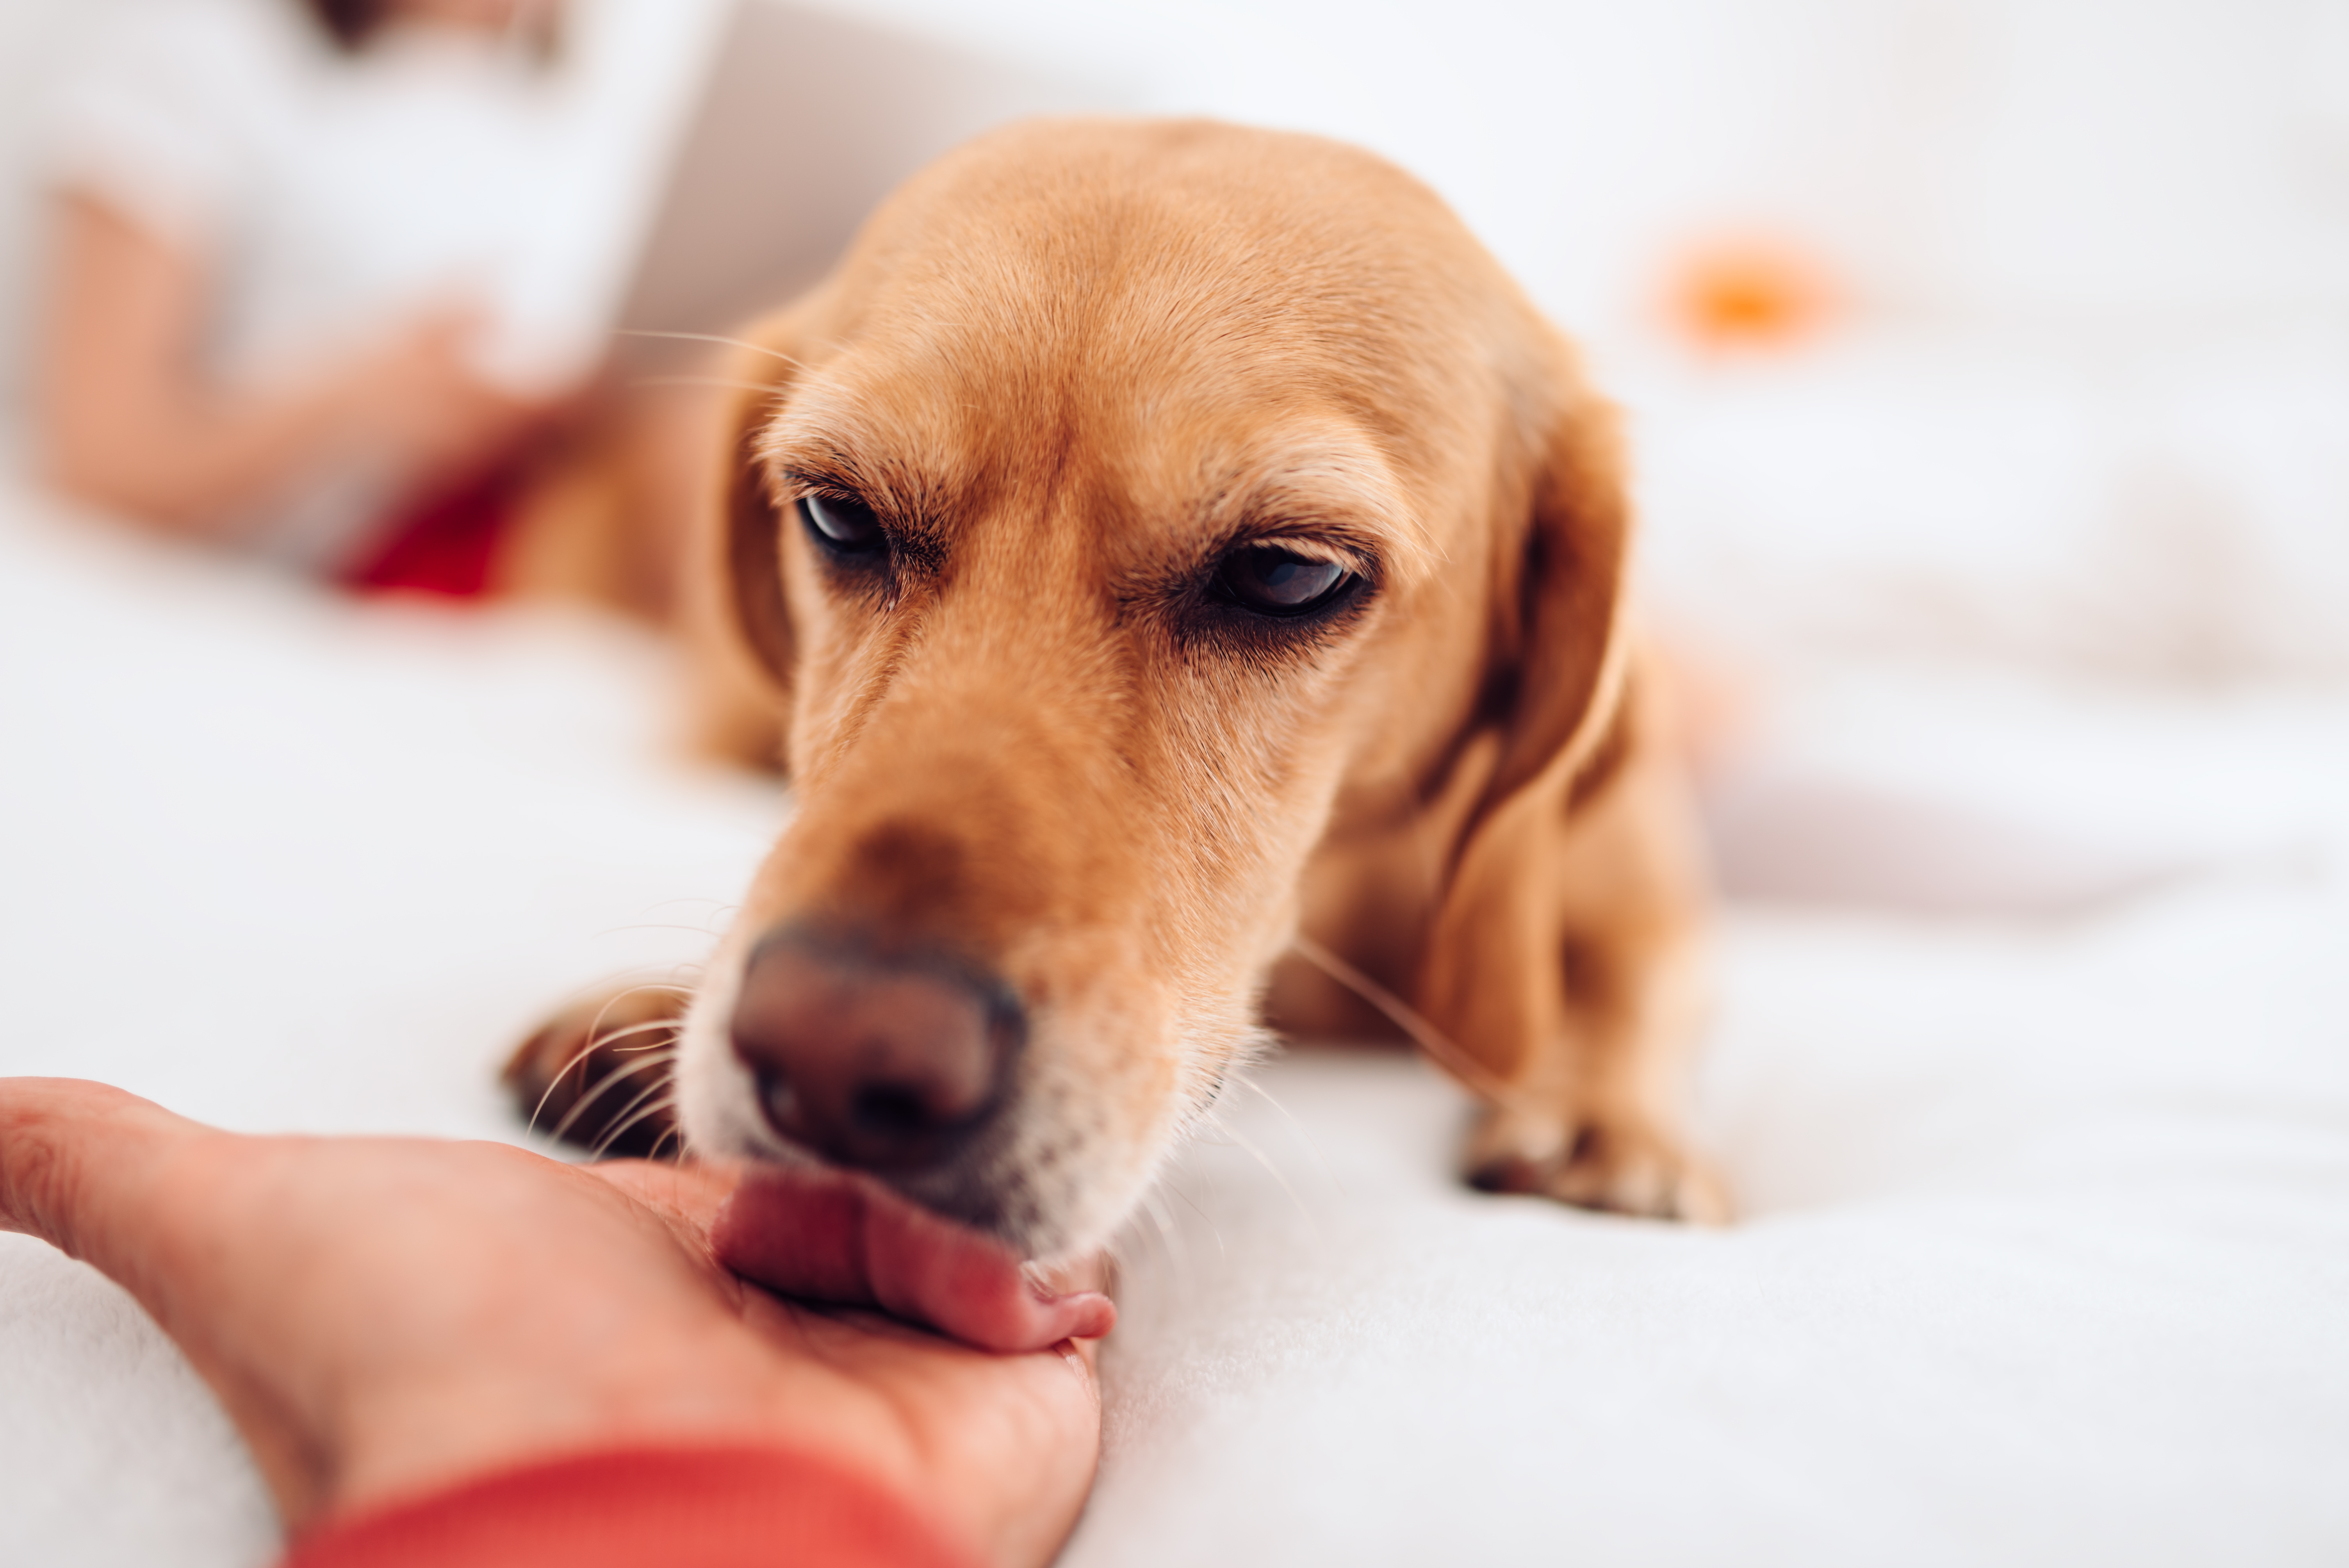 Should You Let Your Dog Lick Your Face? It Depends